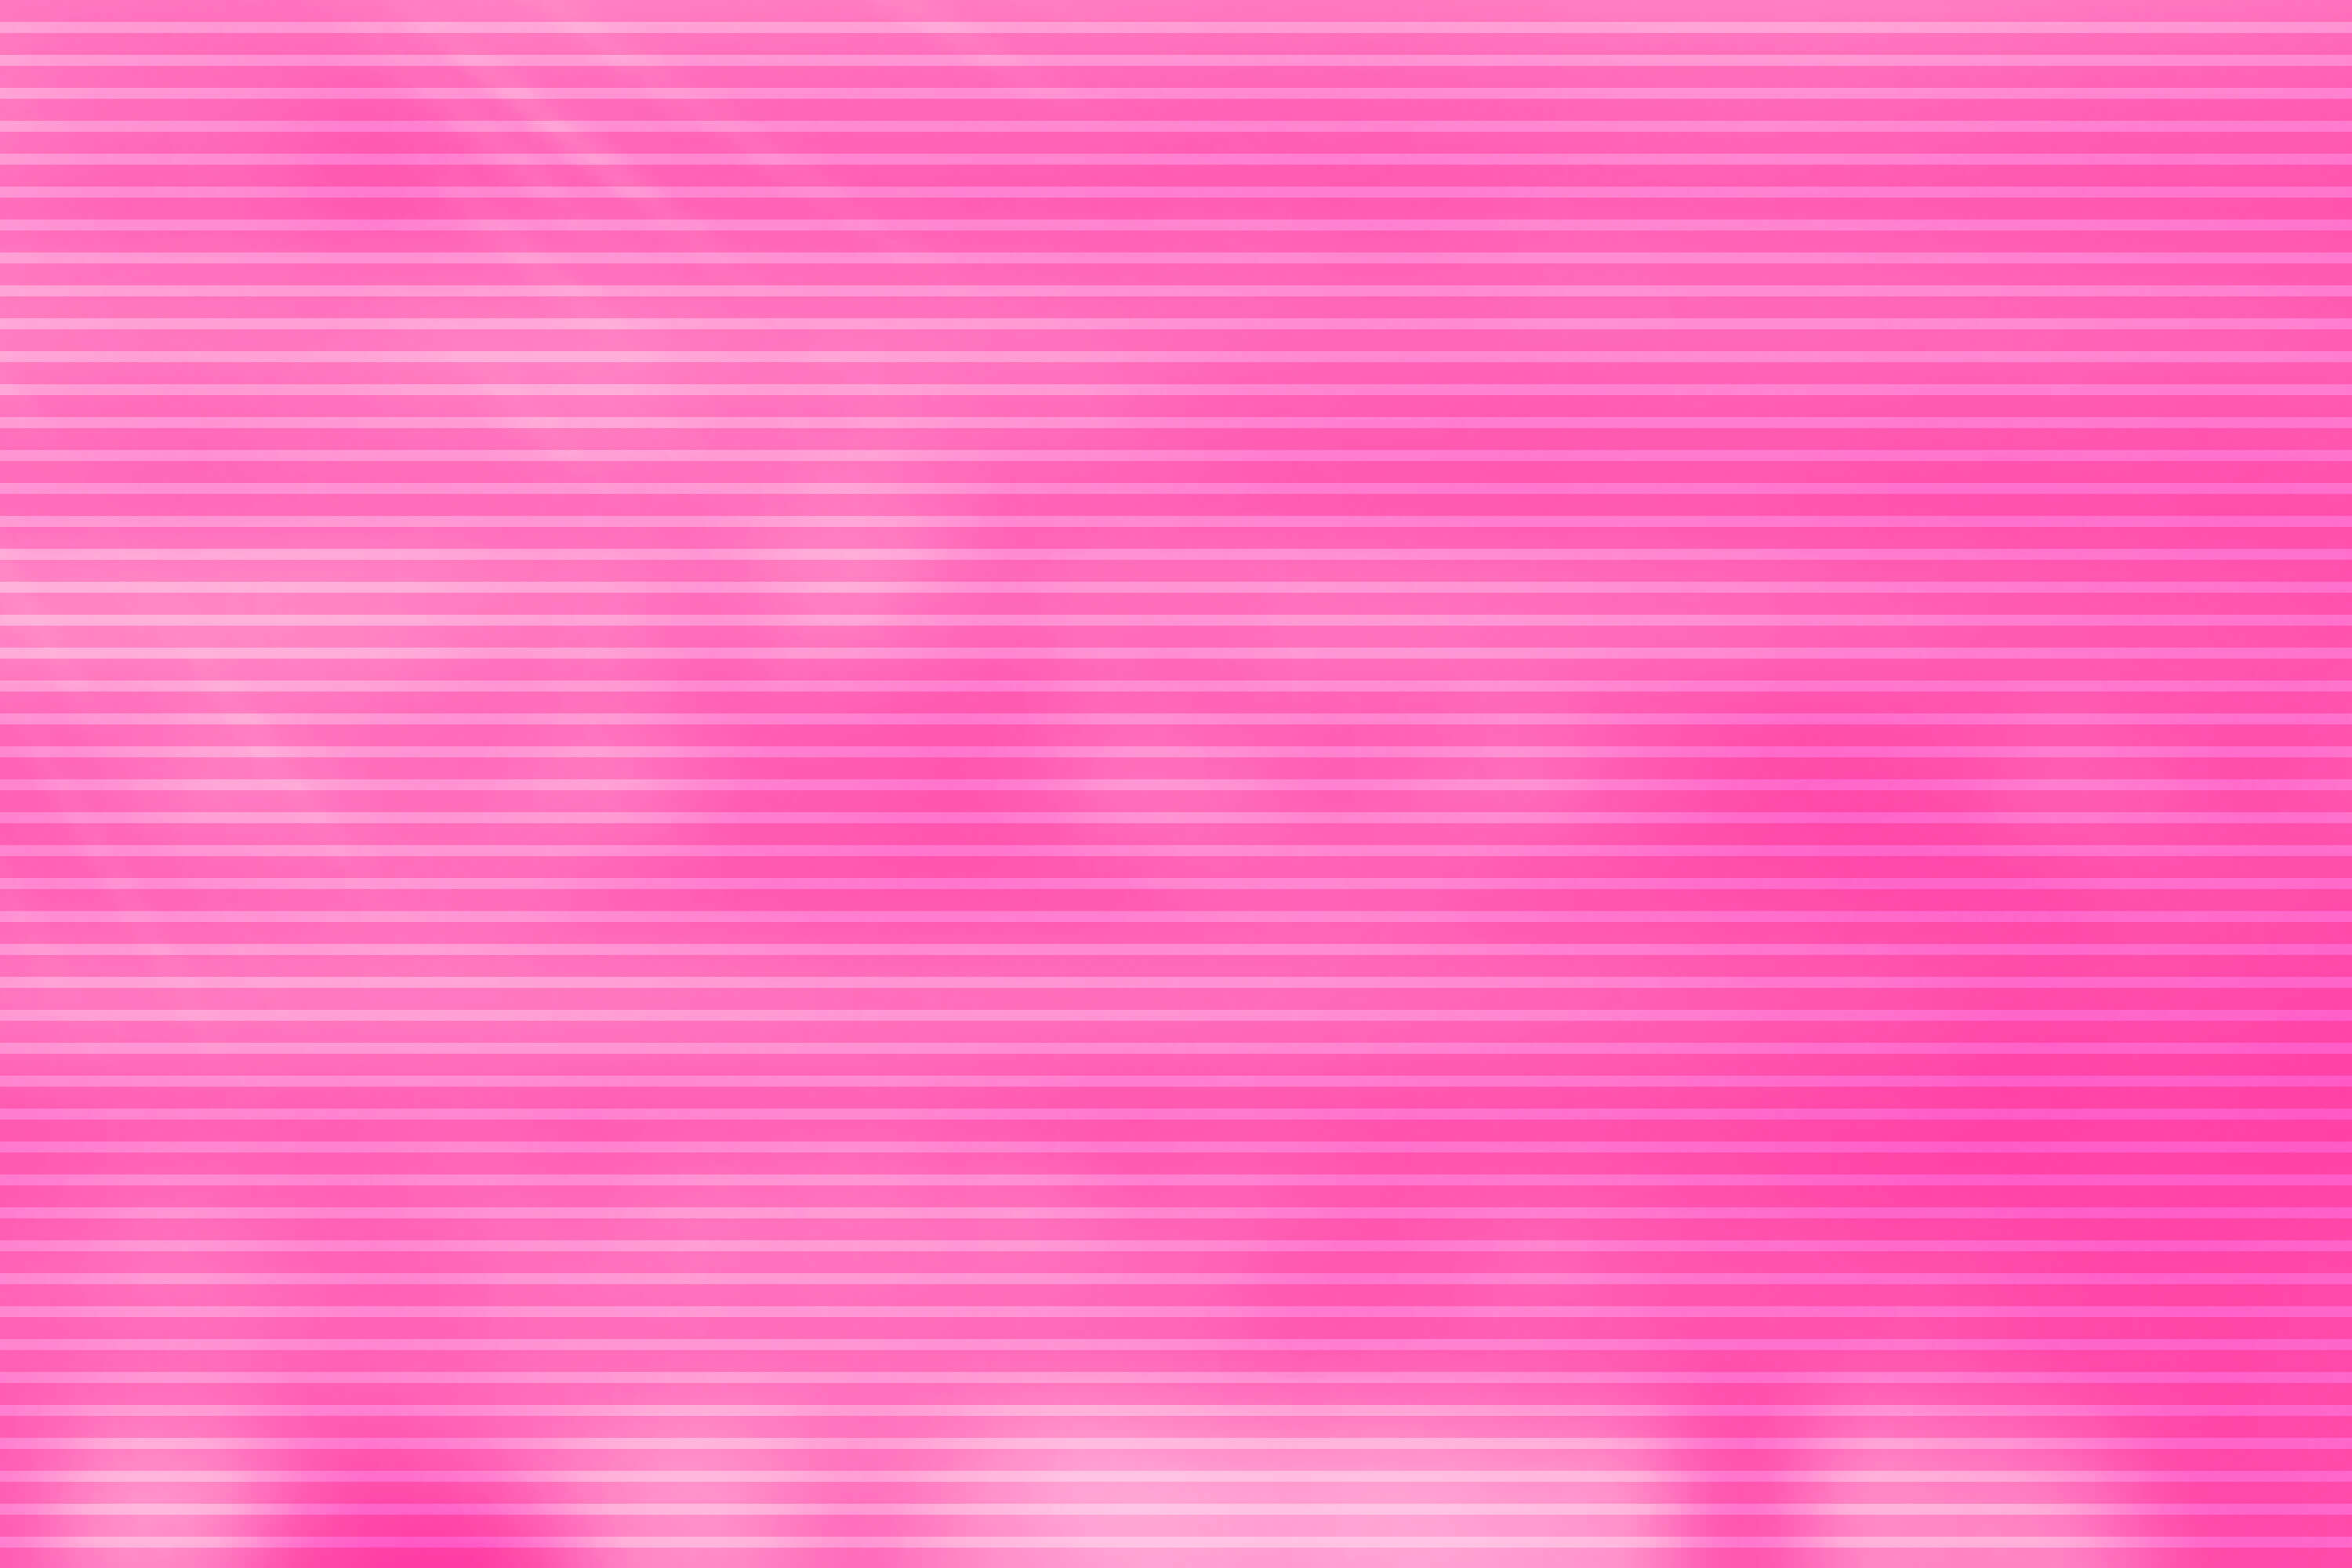 A pink colour field shows slight abstract contours.